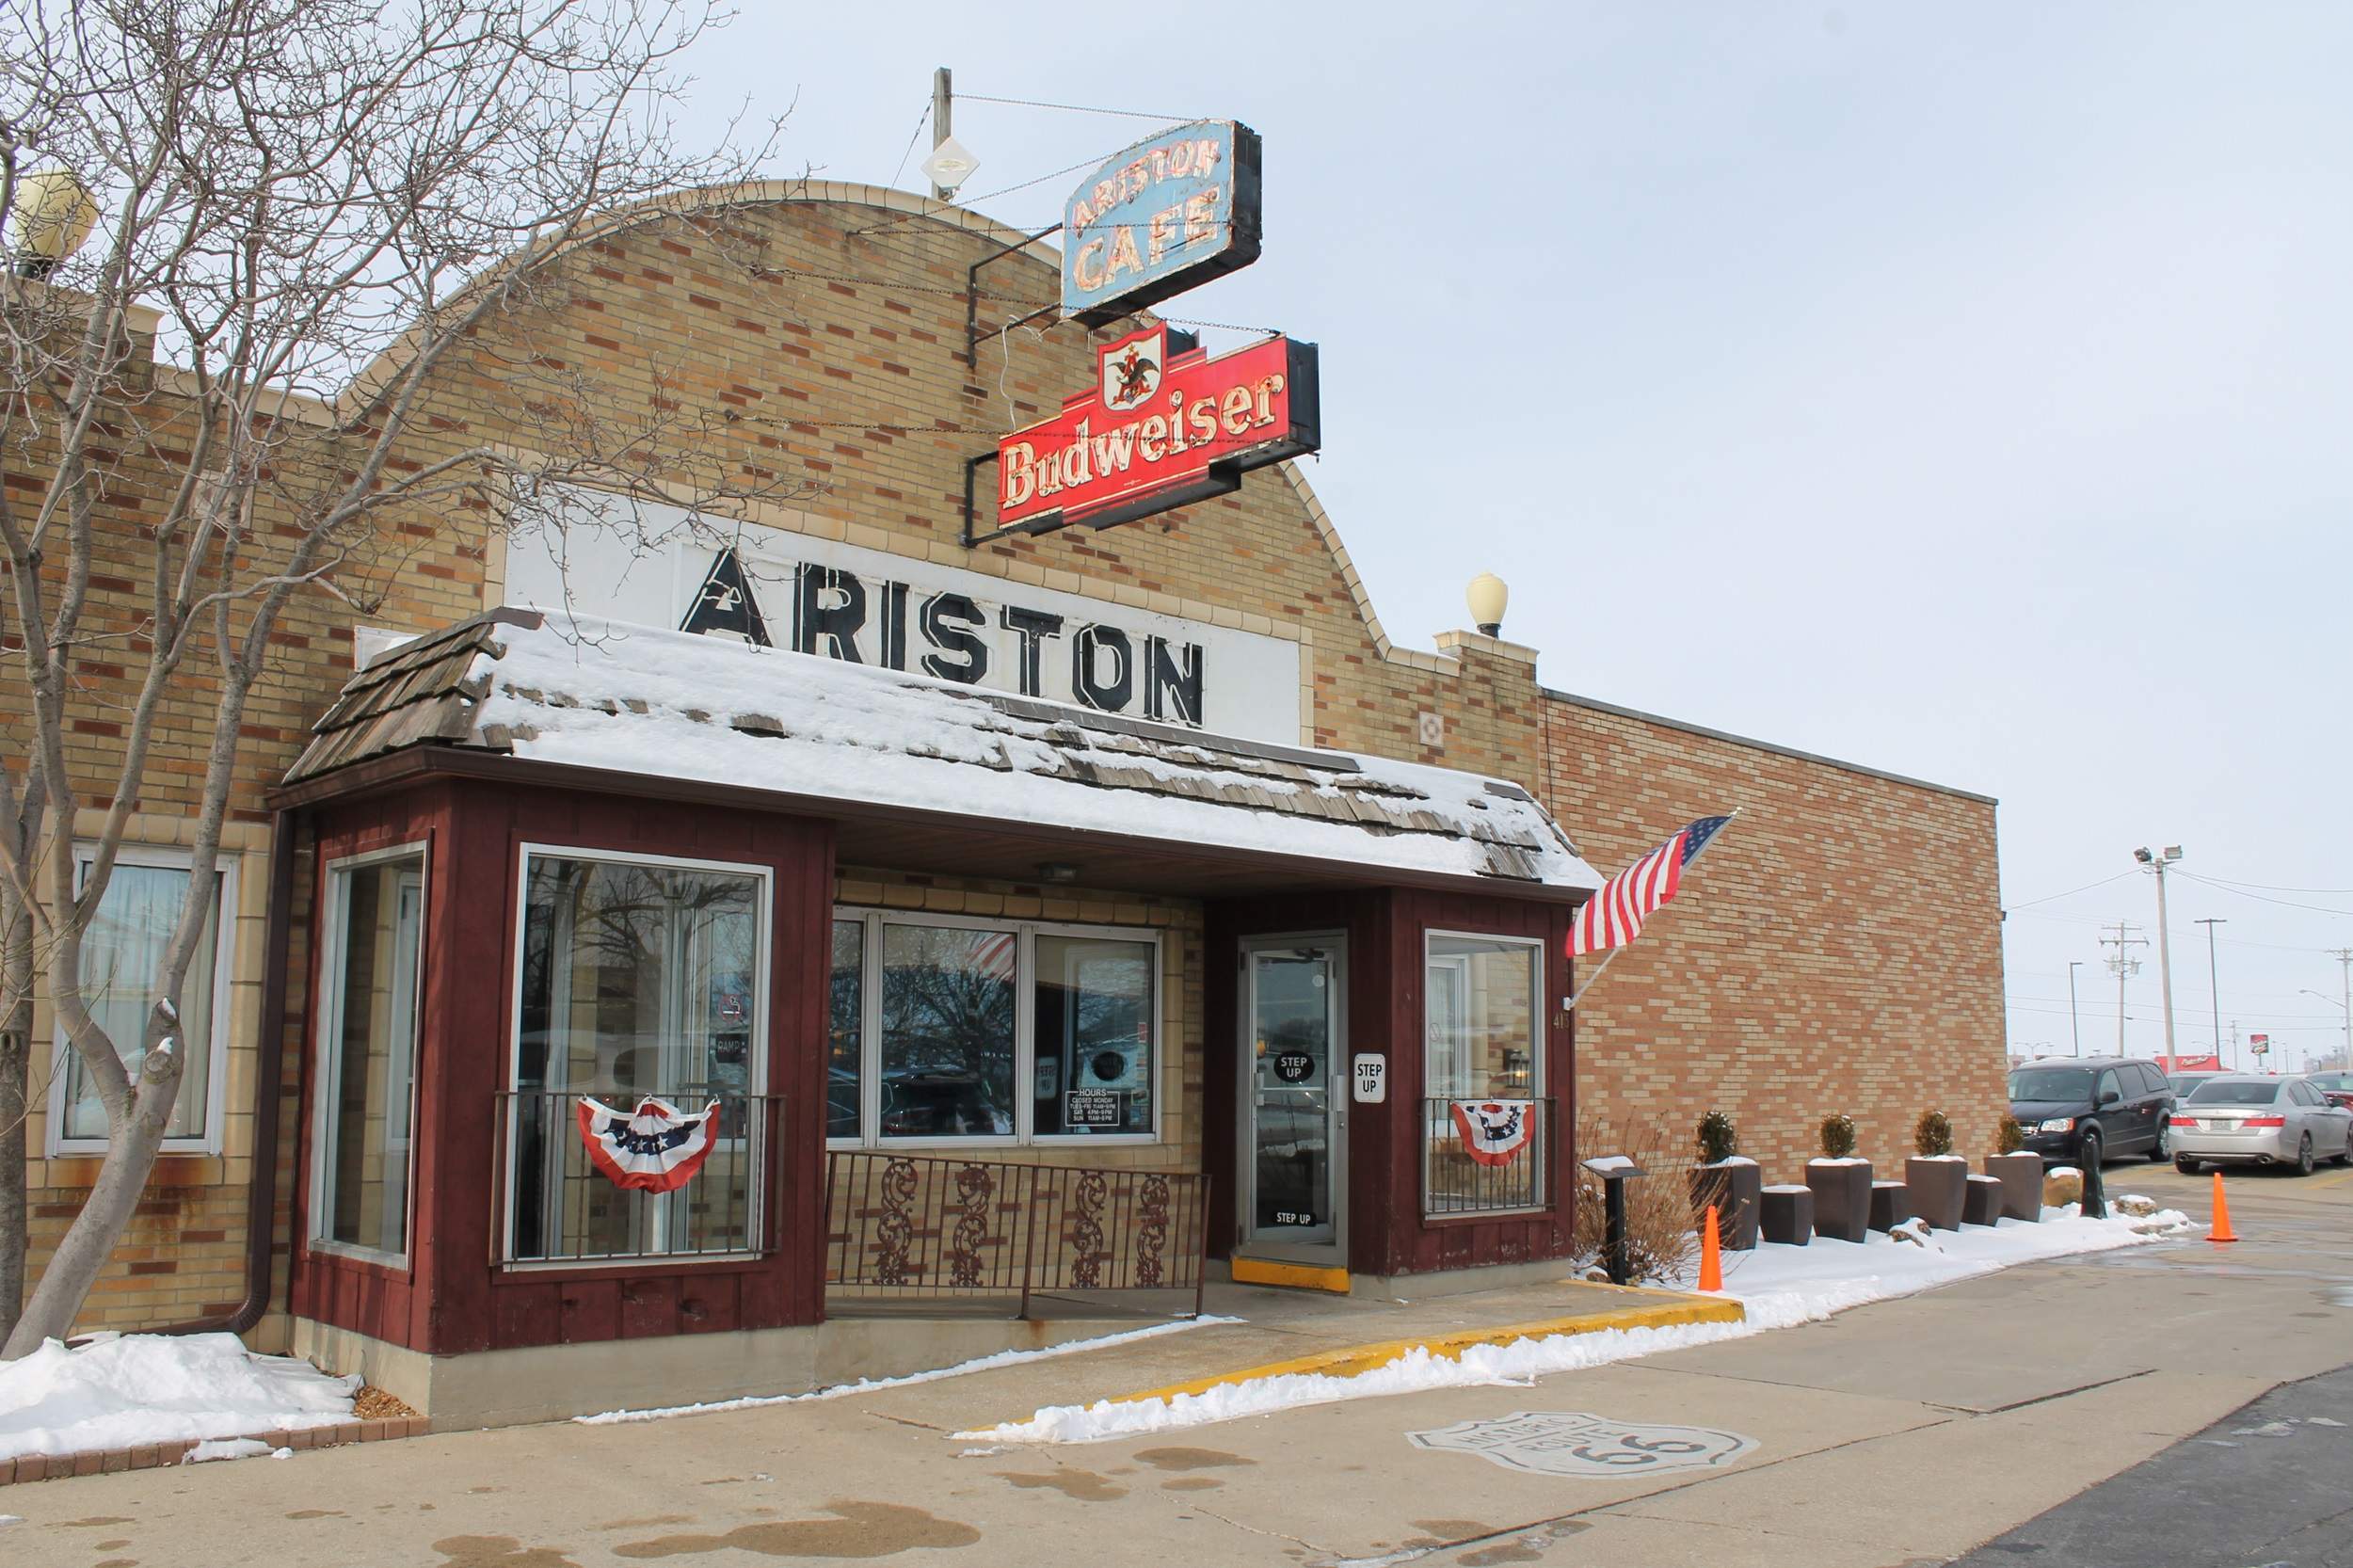 The front facade of the National Registry of Historic Places-listed Ariston Cafe in Litchfield